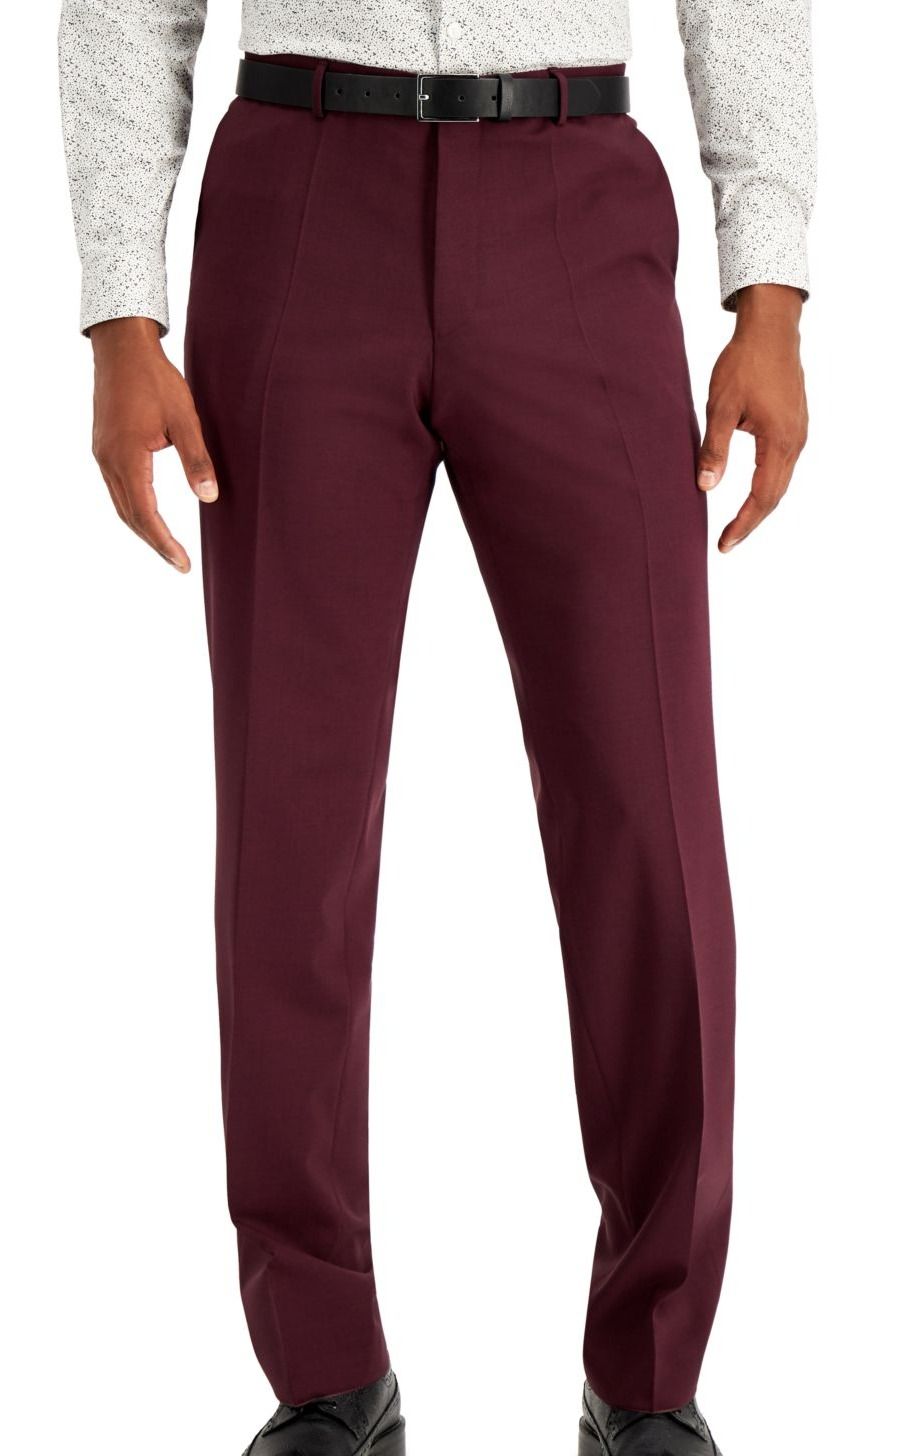 Color: Reds Size Type: Regular Bottoms Size (Men's): 34 Inseam: 33 Type: Pants Style: Dress Pants Occasion: Formal Material: Wool Blends Stretch: YES